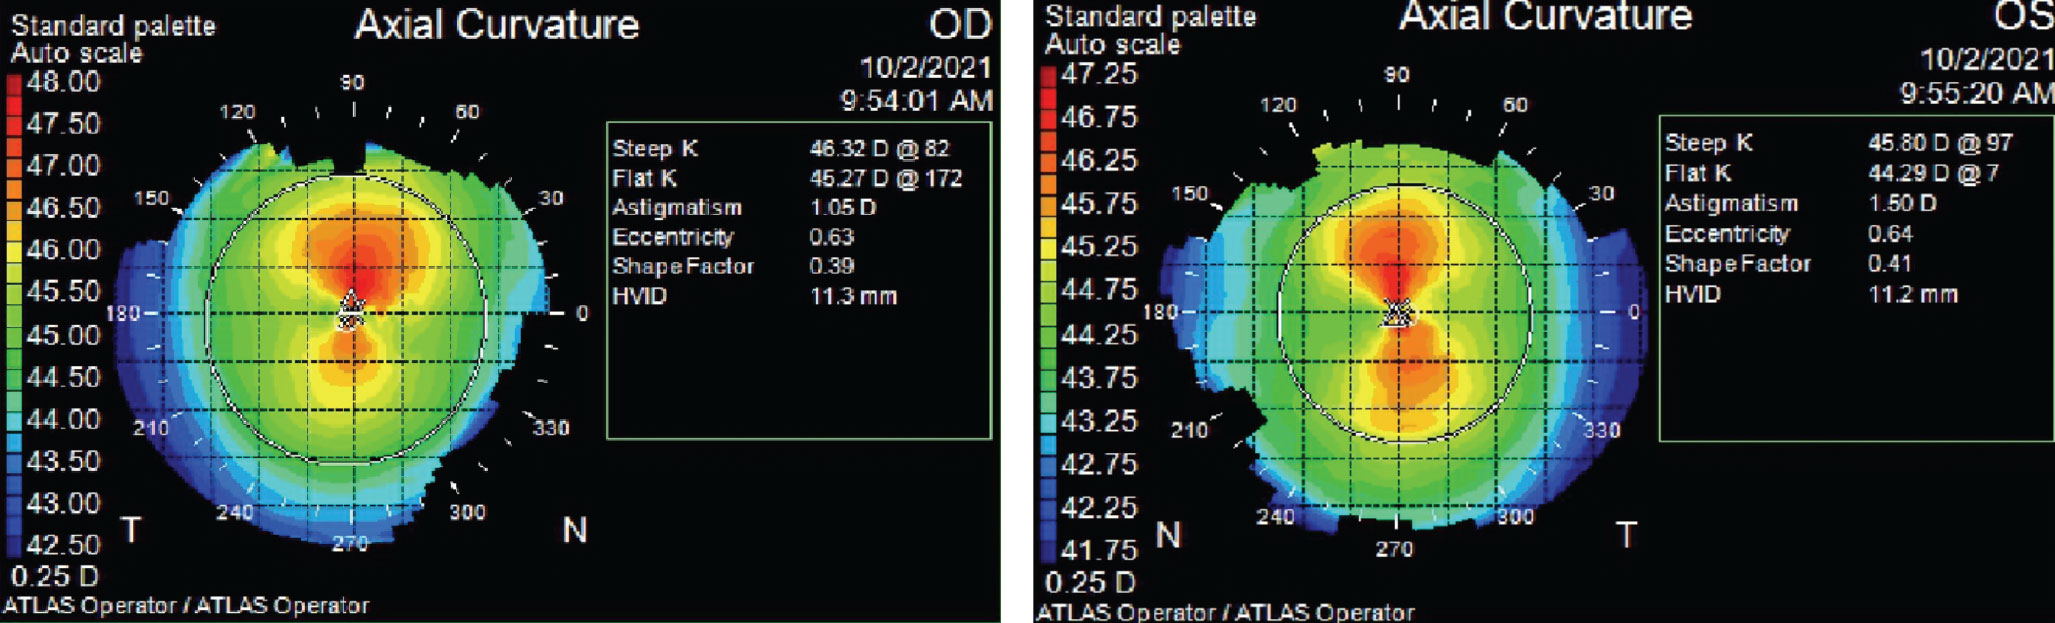 Zeiss Atlas axial topography maps of both eyes show smaller-than-average HVID measurements and steeper-than-average K readings.